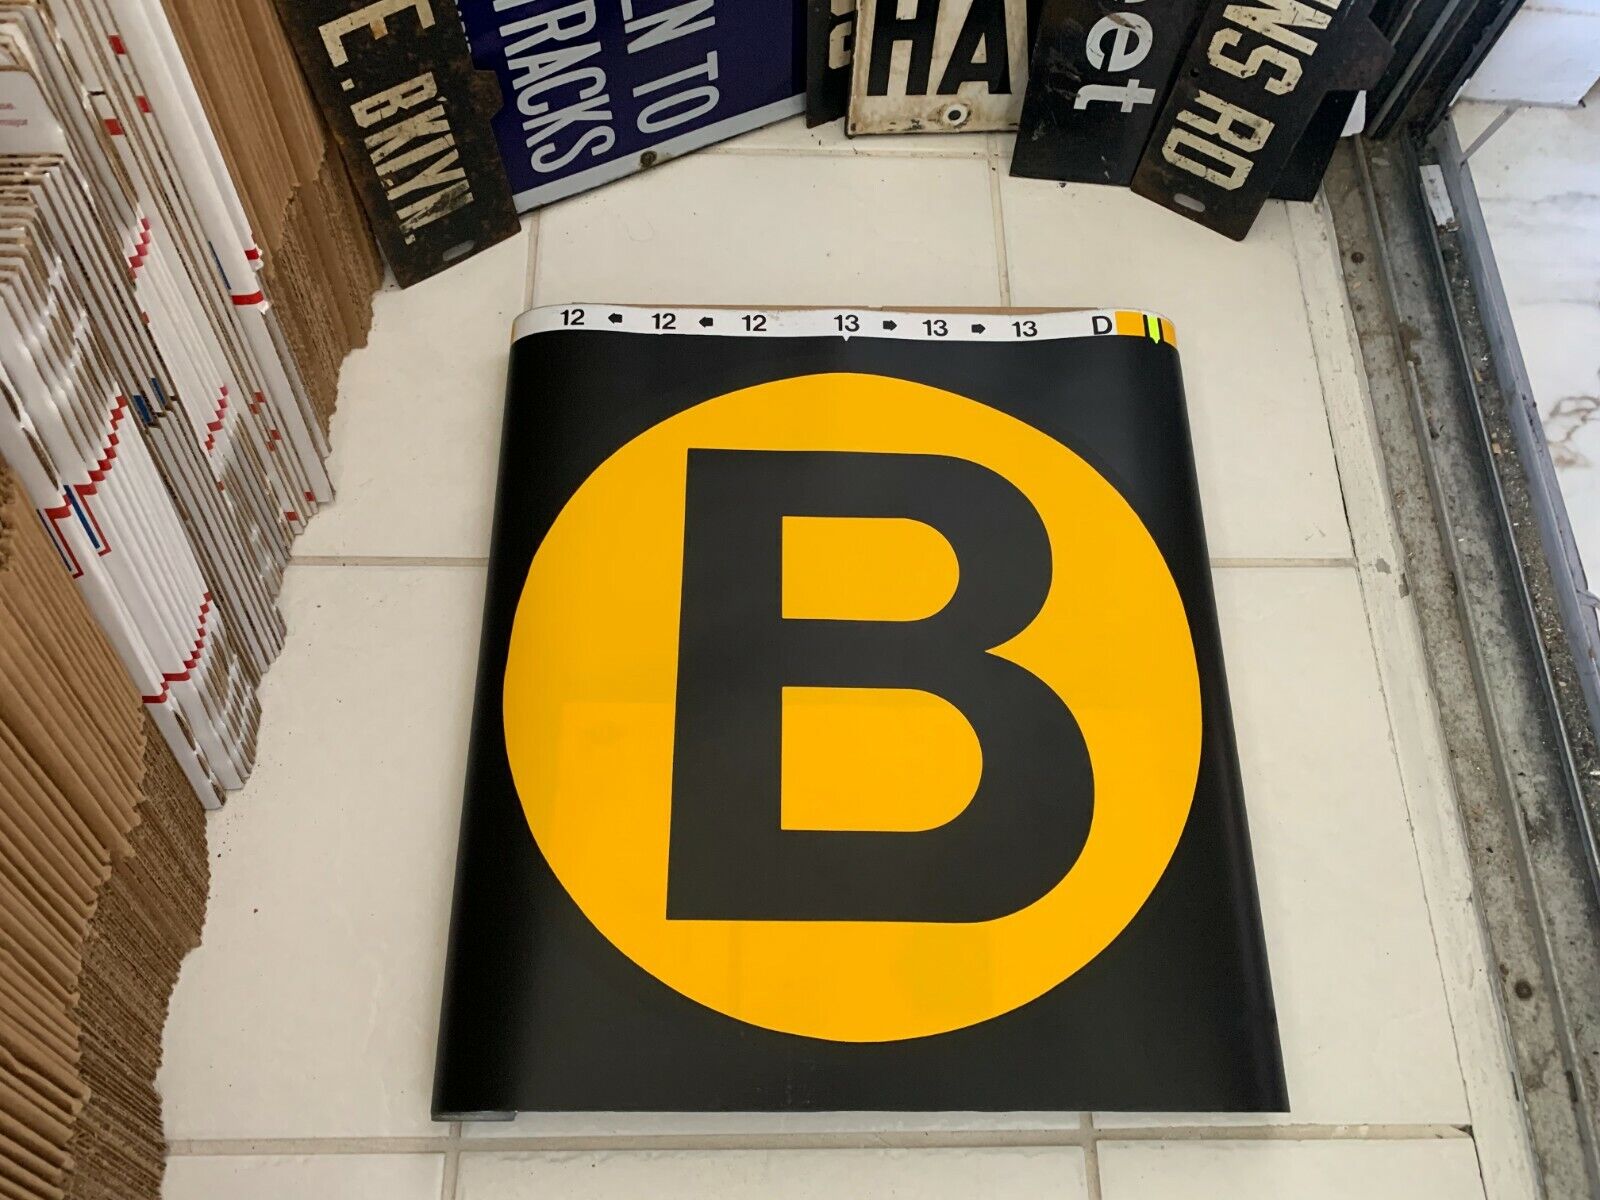 LIMITED PRODUCTION NY NYC SUBWAY ROLL SIGN BMT BROADWAY B LINE WEST END BROOKLYN